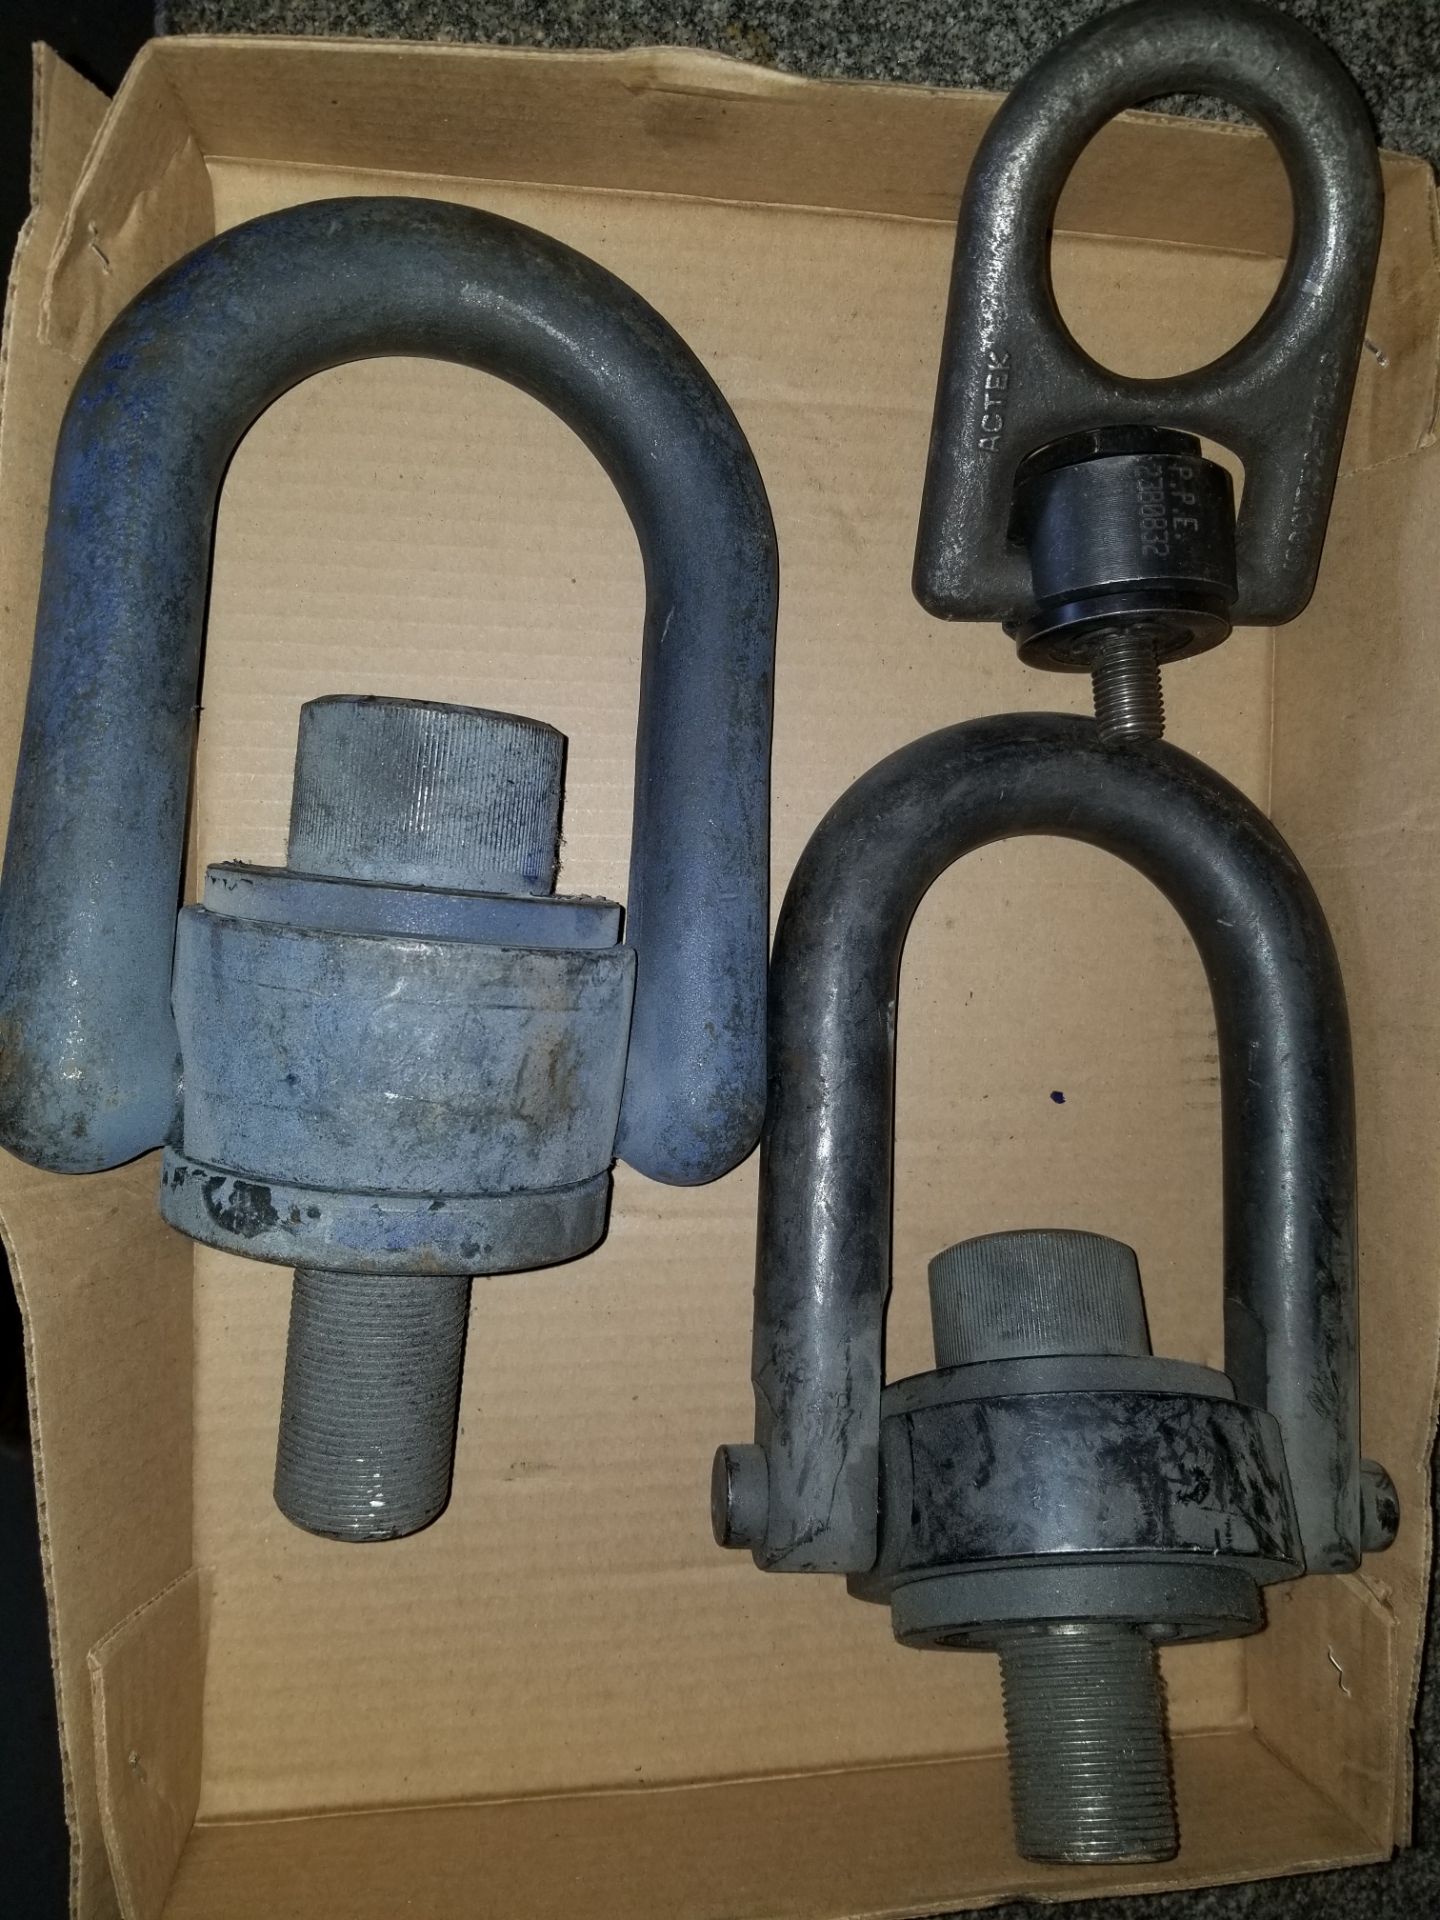 Group of 3 Rigging Lift Rings